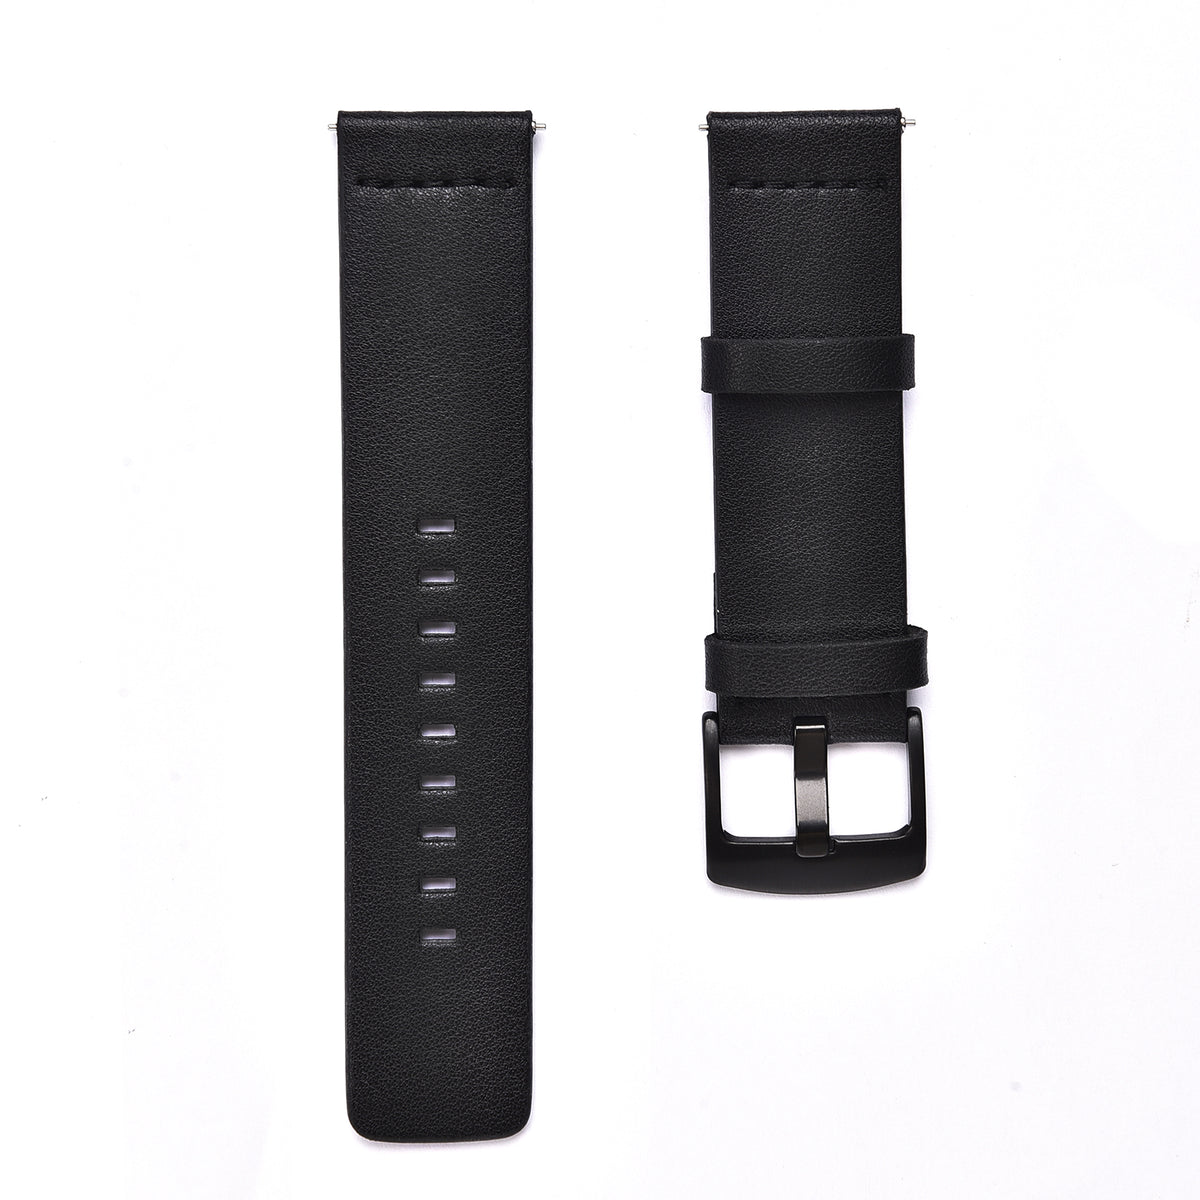 TOZO S2 Smart Watch Leather Strap